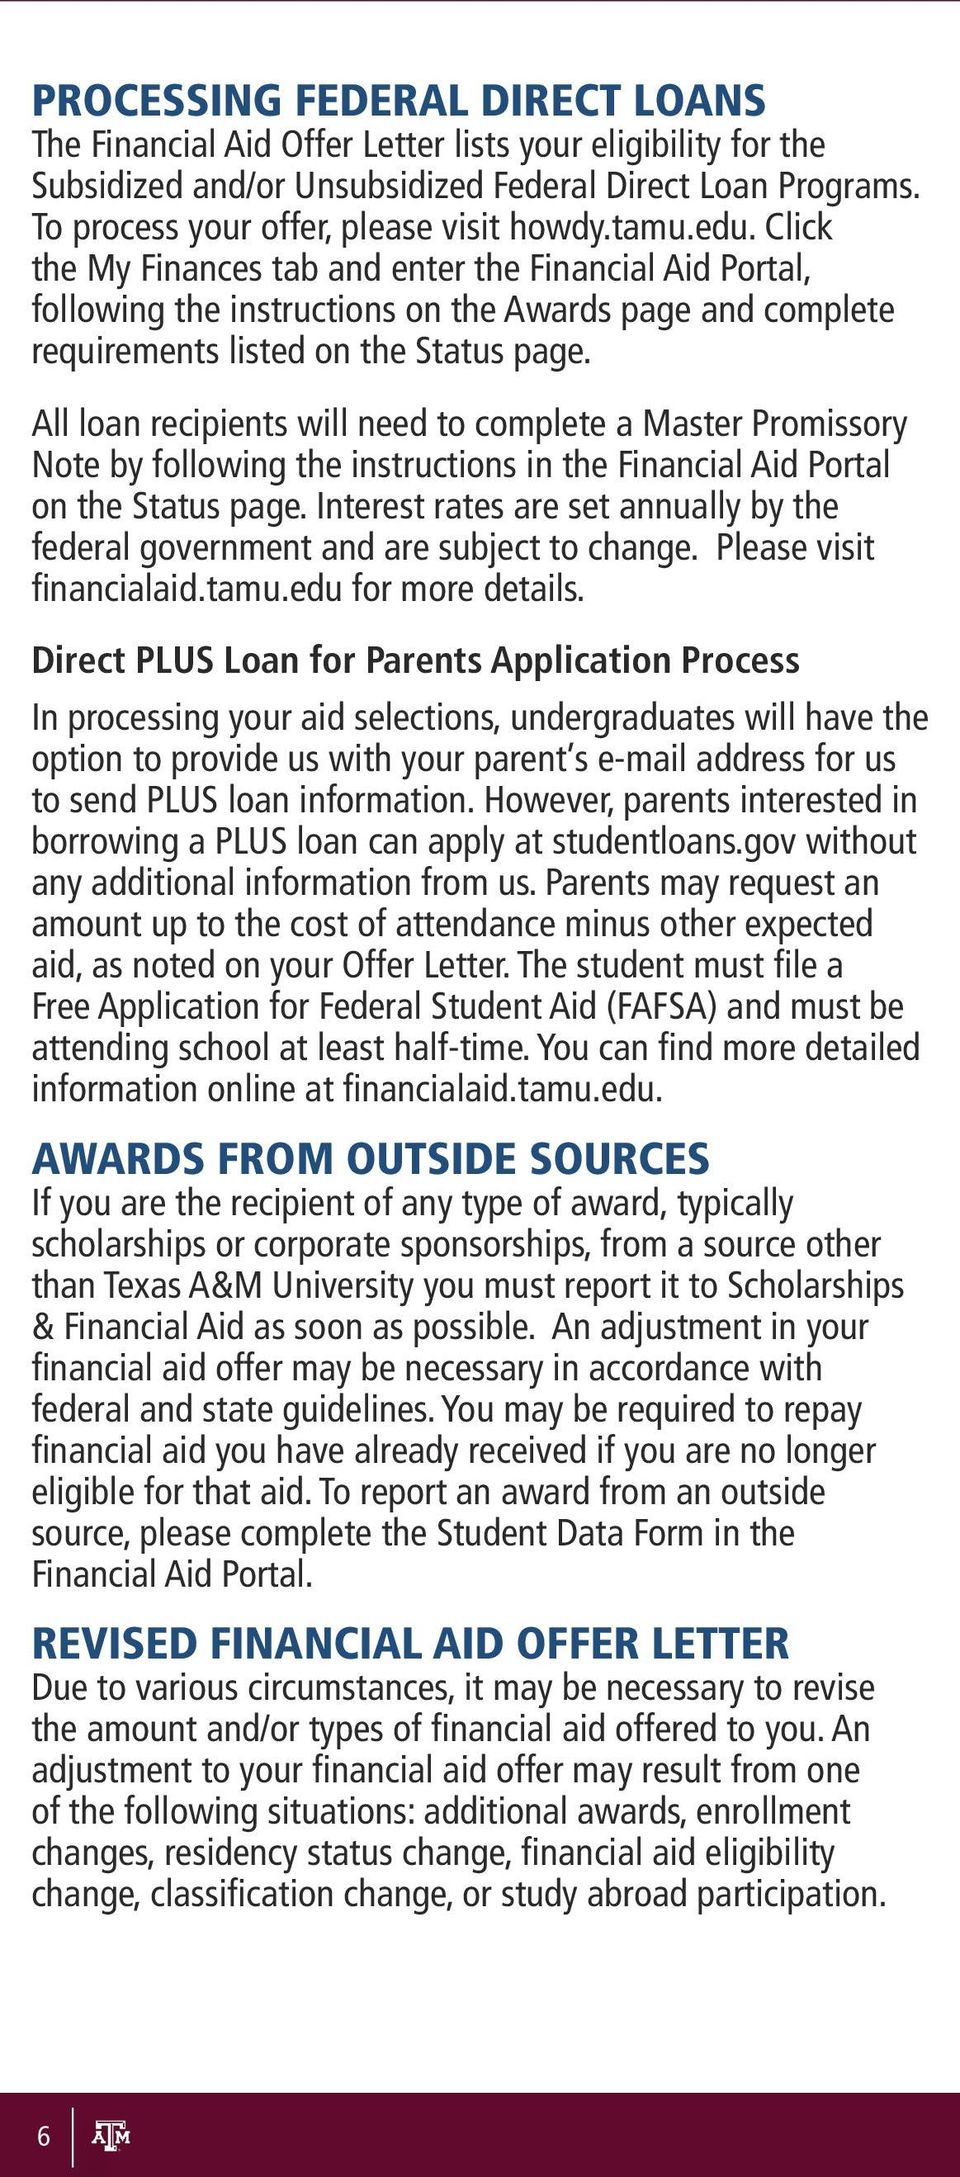 All loan recipients will need to complete a Master Promissory Note by following the instructions in the Financial Aid Portal on the Status page.